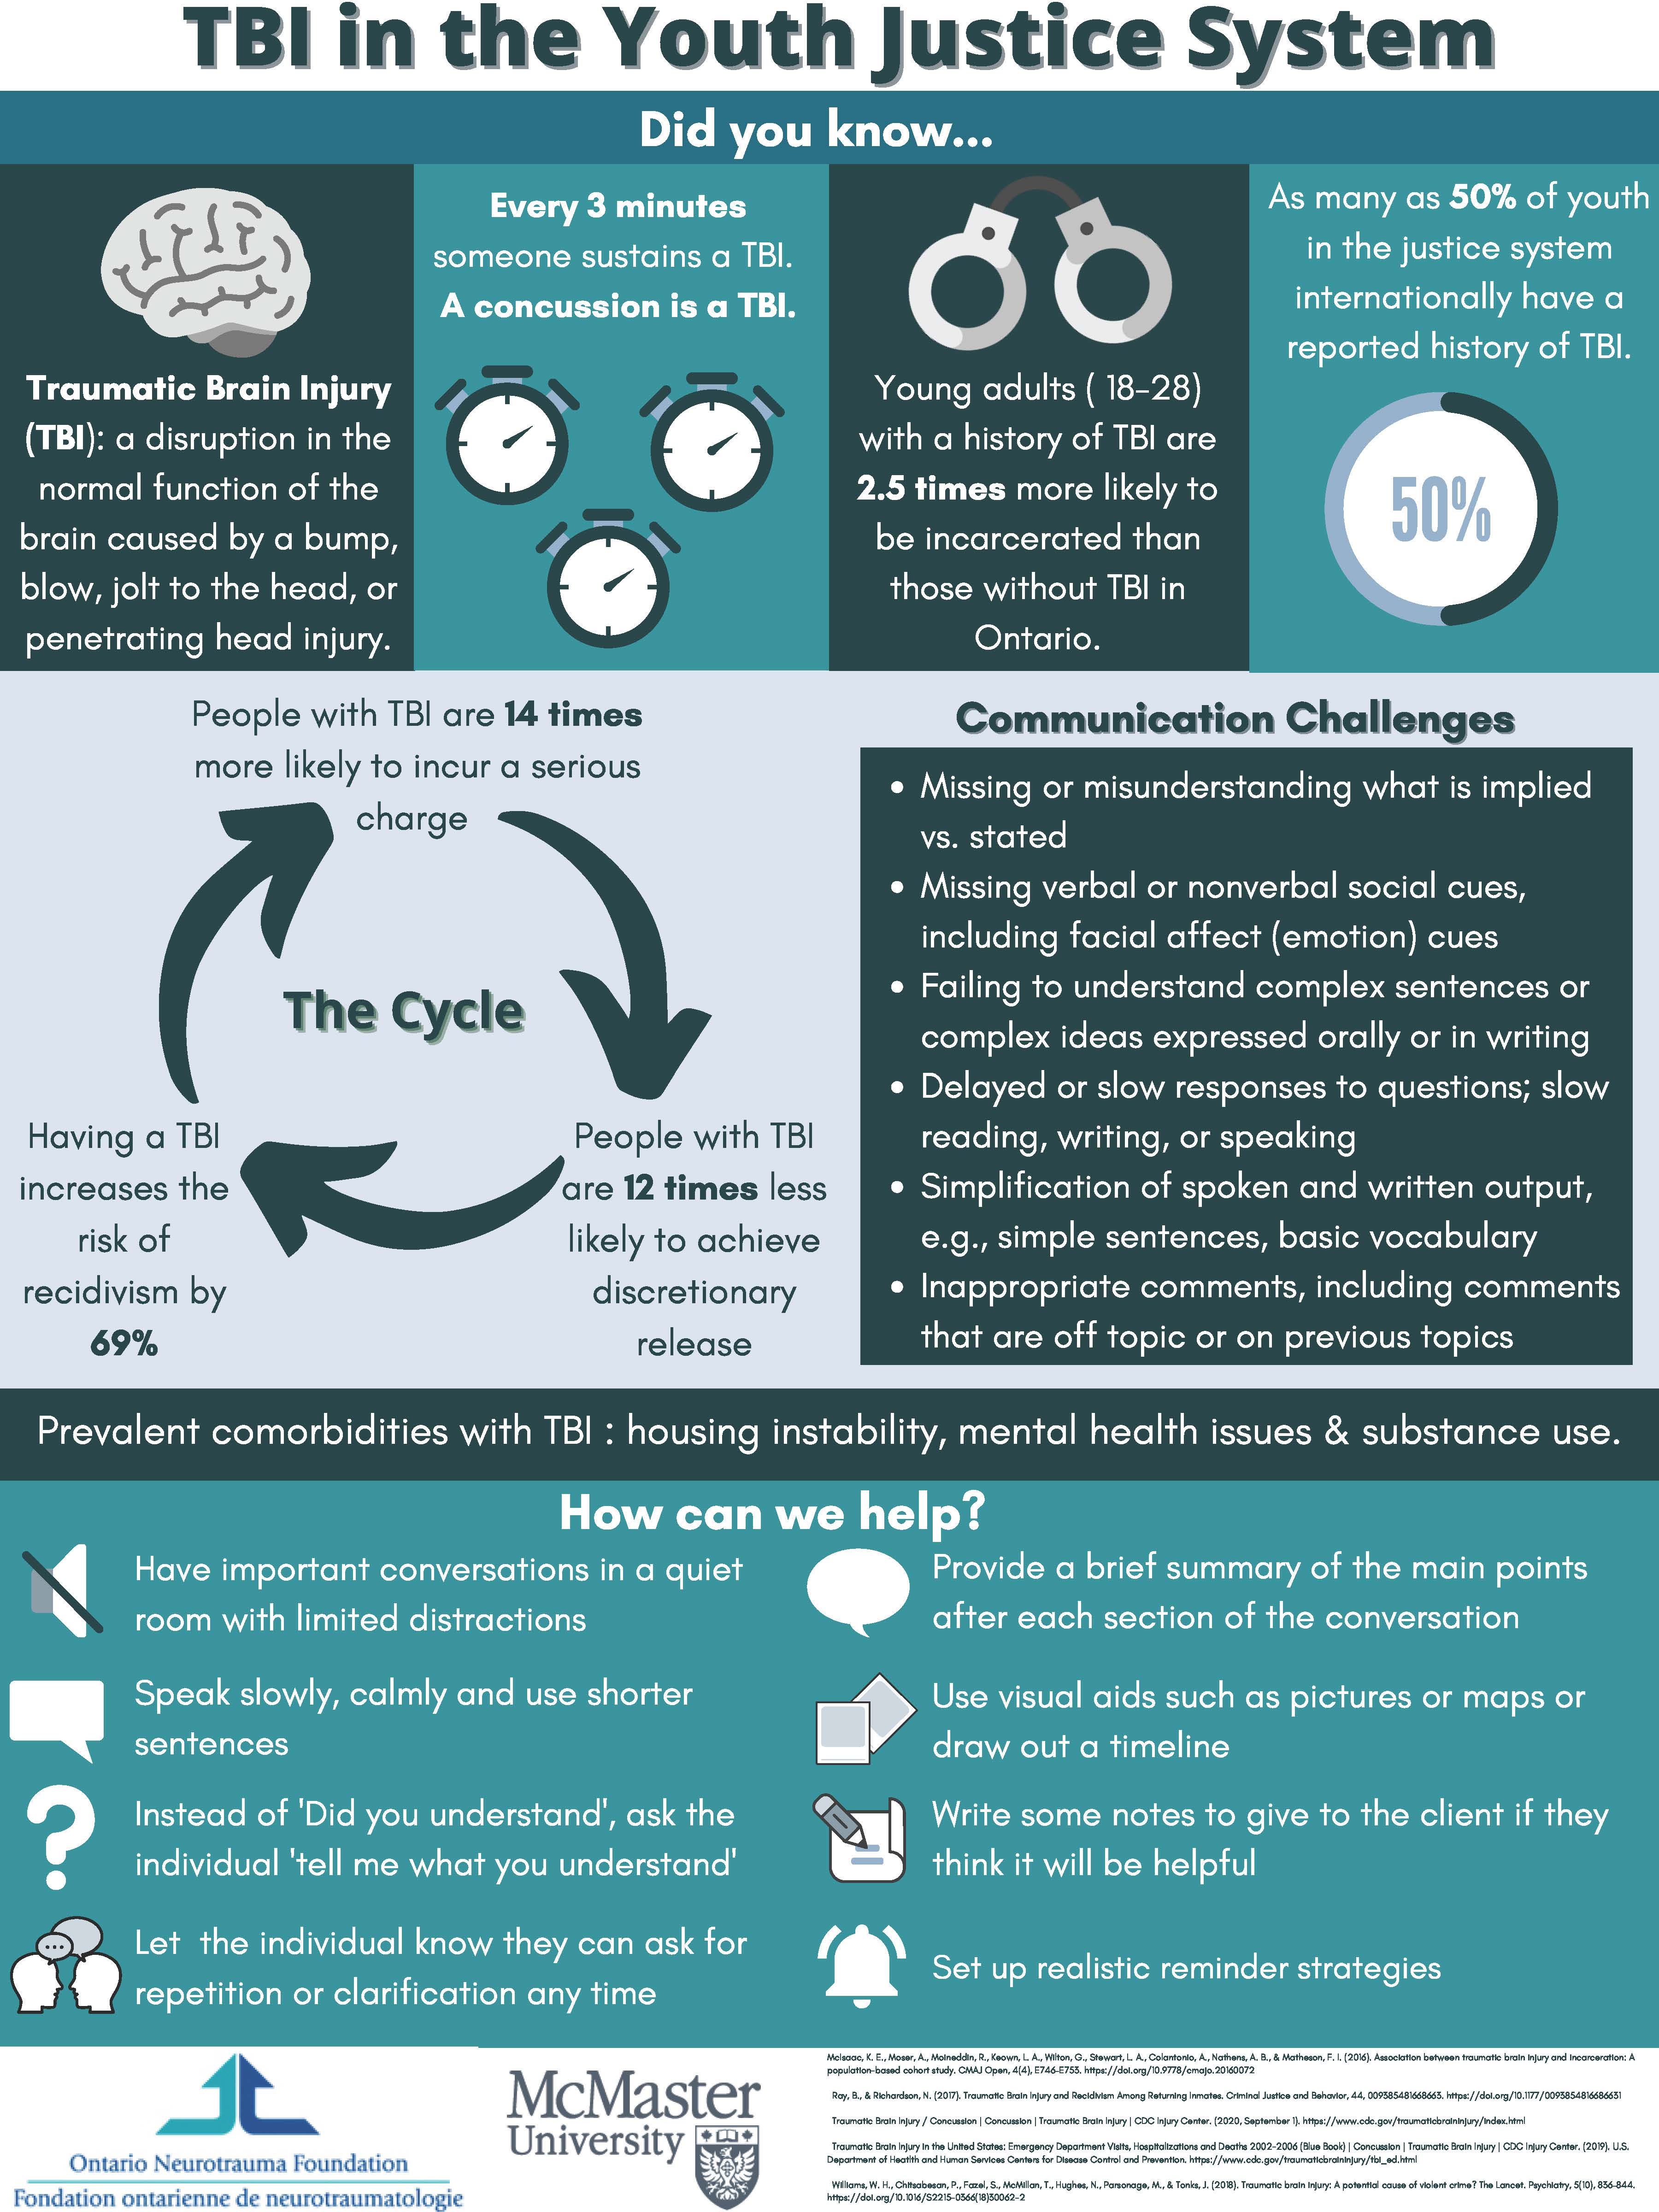 TBI in the Youth Justice Center Infographic